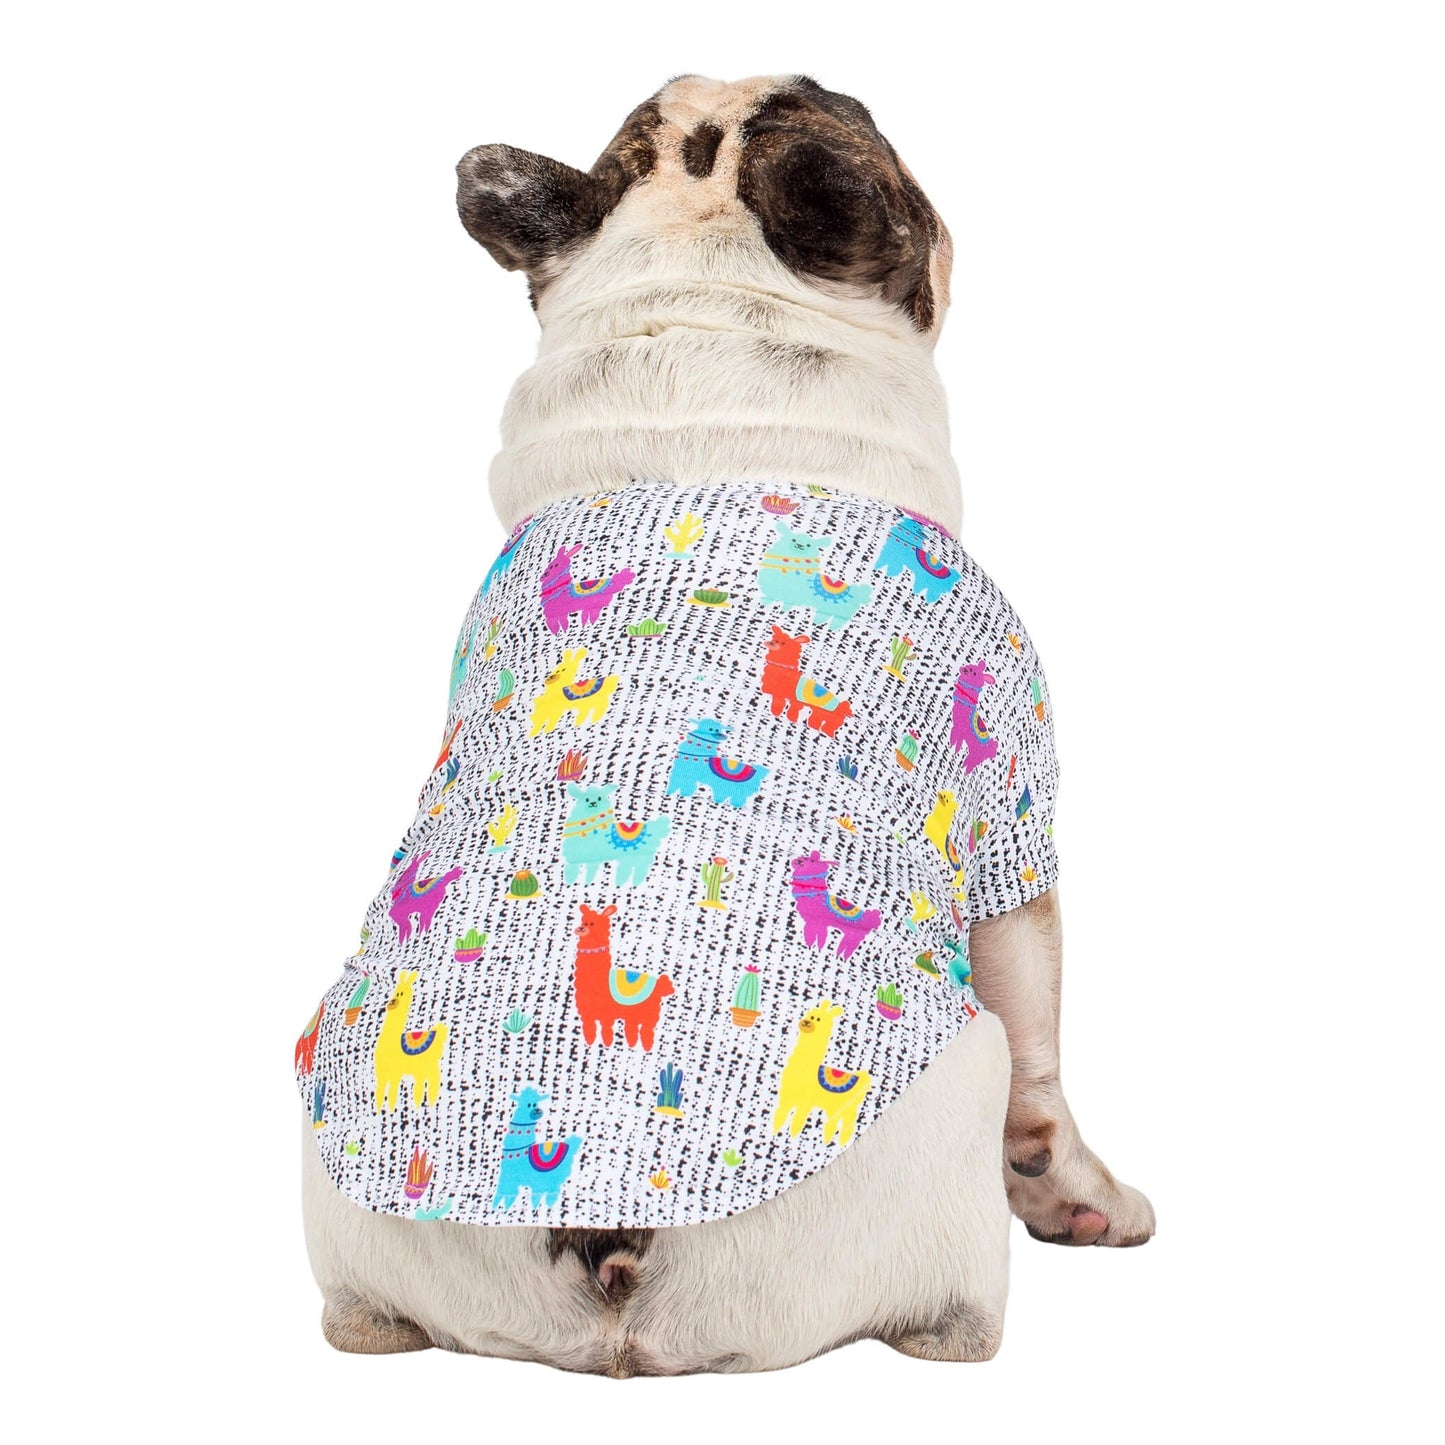 A French Bulldog sitting down while fcing away. He's wearing a No Probllama dog shirt made by Vibrant Hound.